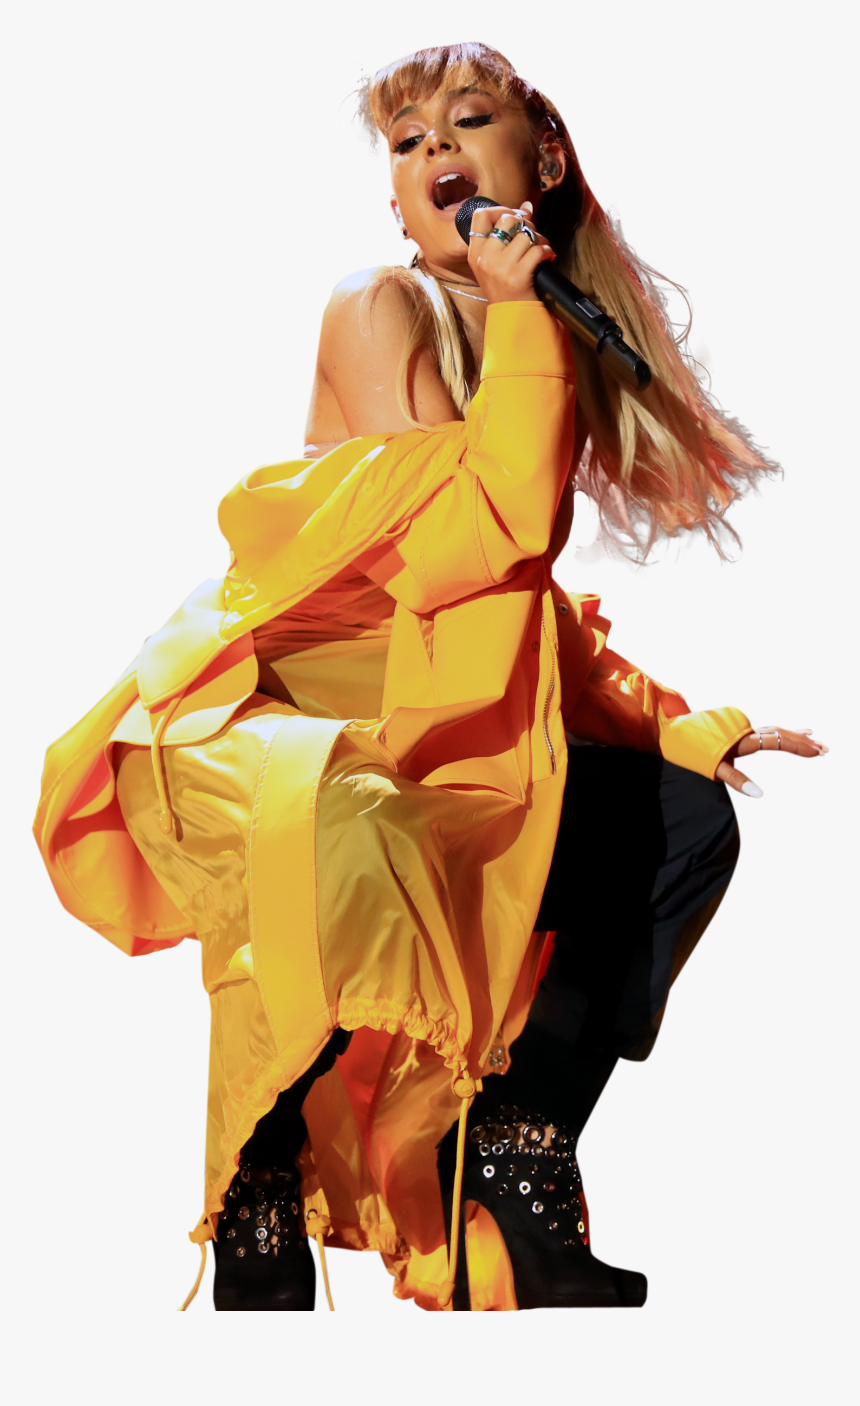 Ariana Grande In Yellow Dress On Stage Png Image - Ariana Grande Yellow Aesthetic, Transparent Png, Free Download